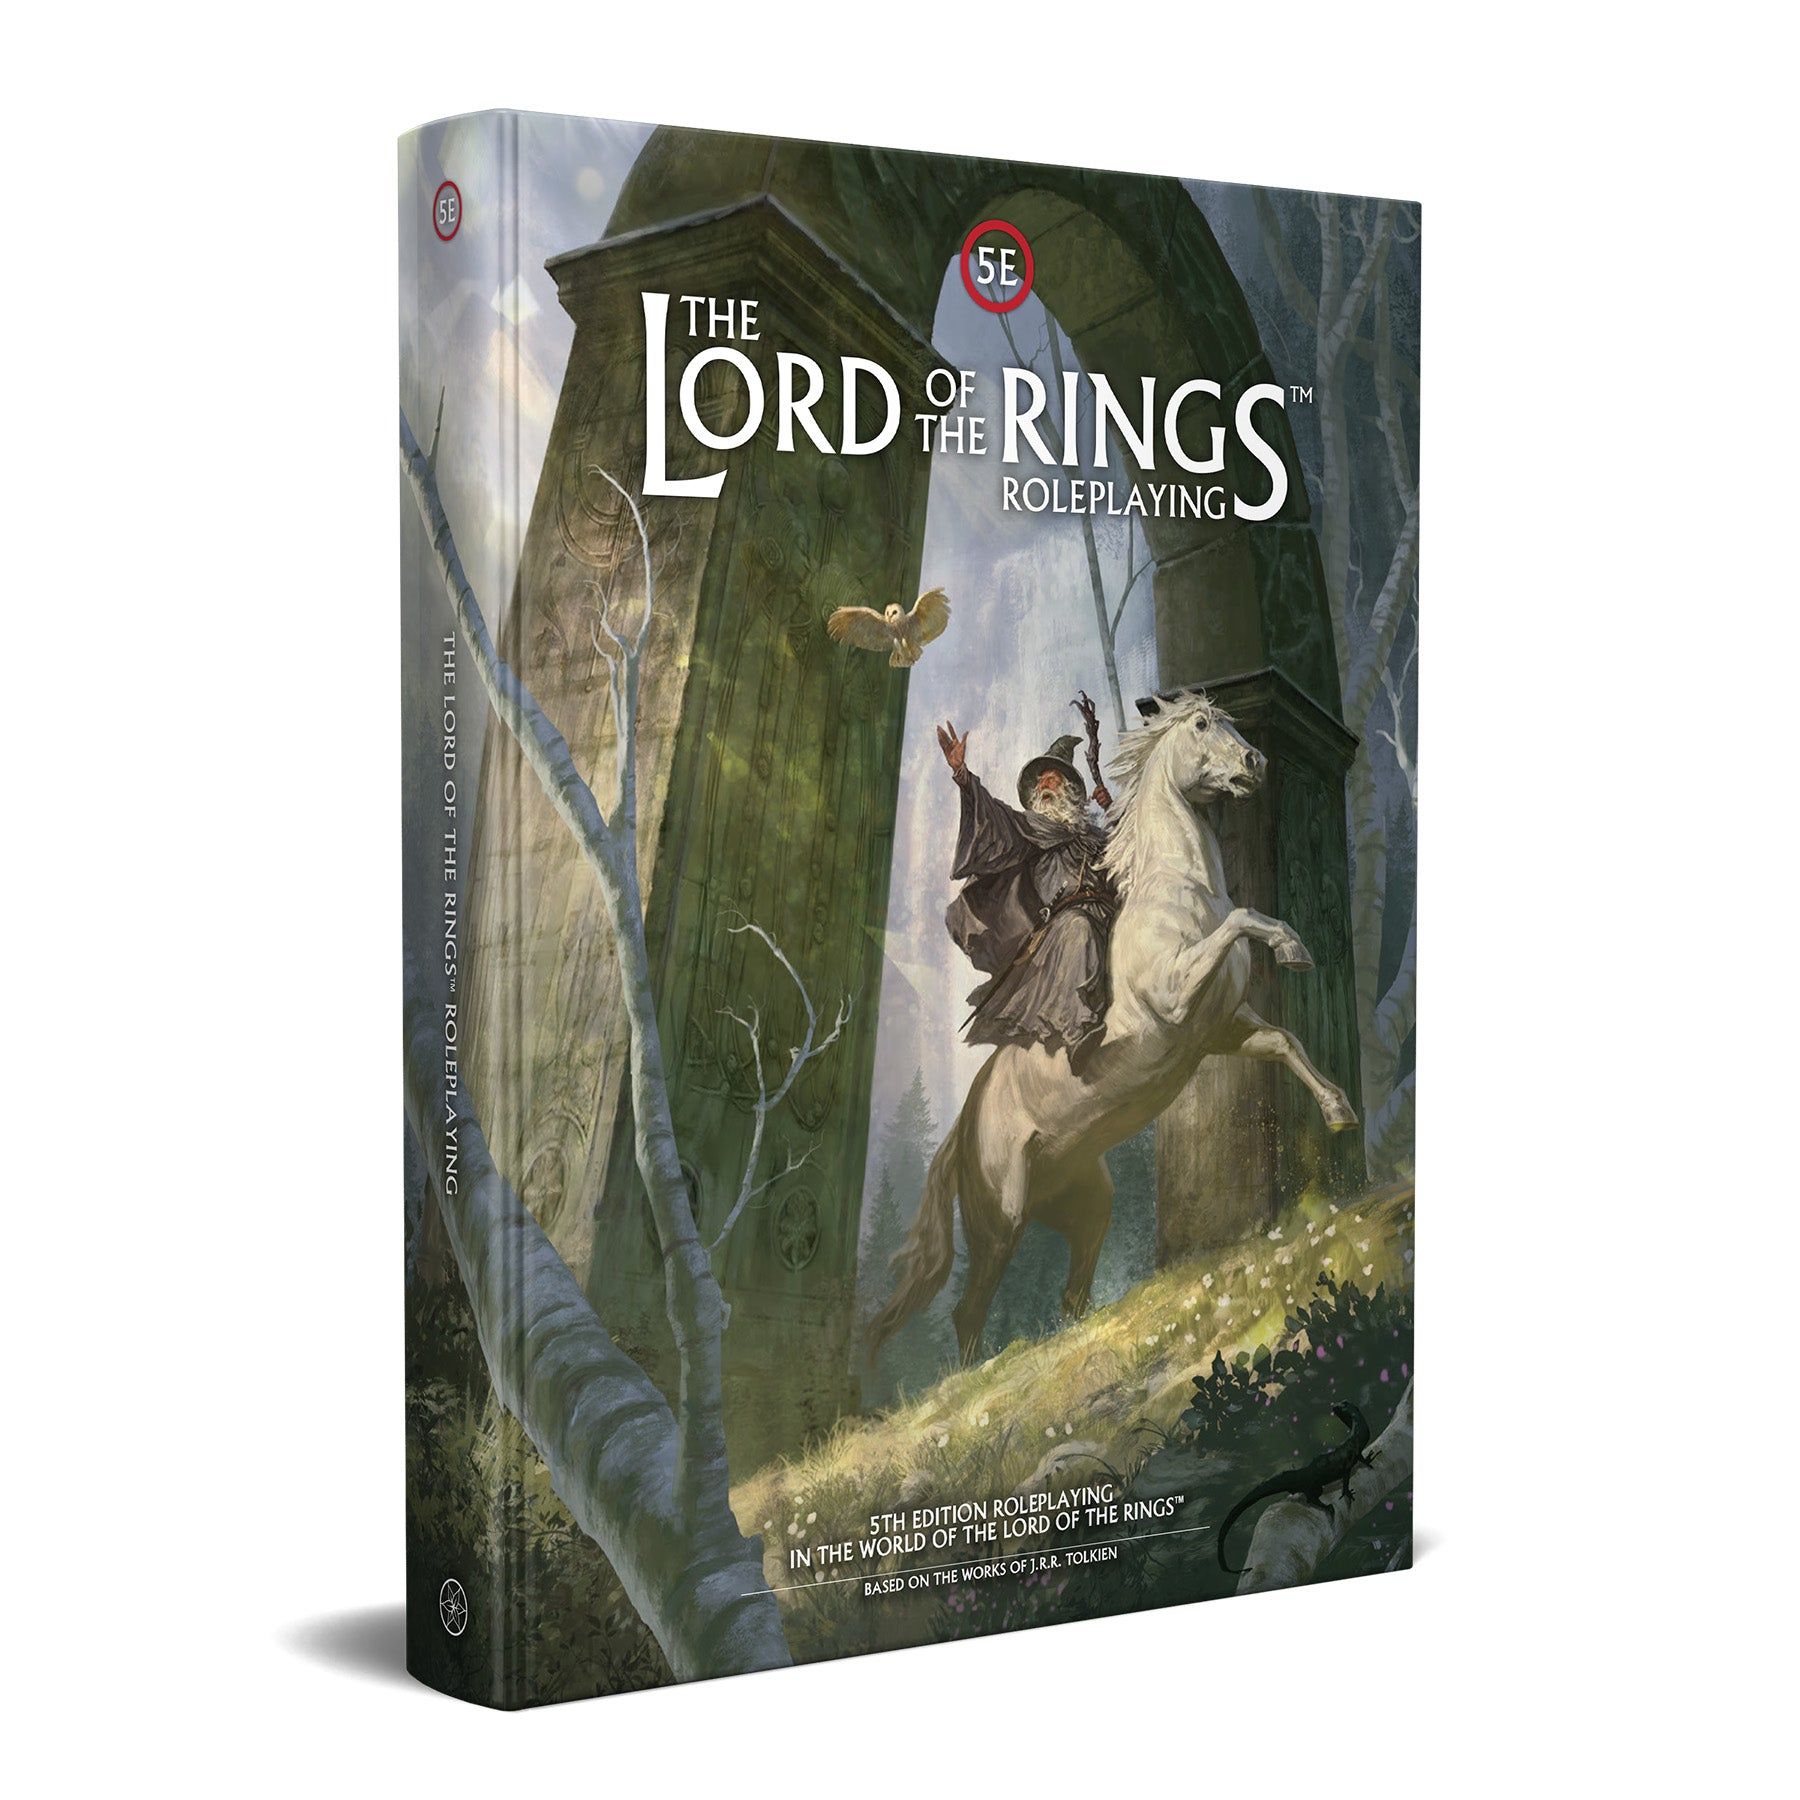 Image of The Lord of the Rings Roleplaying 5E